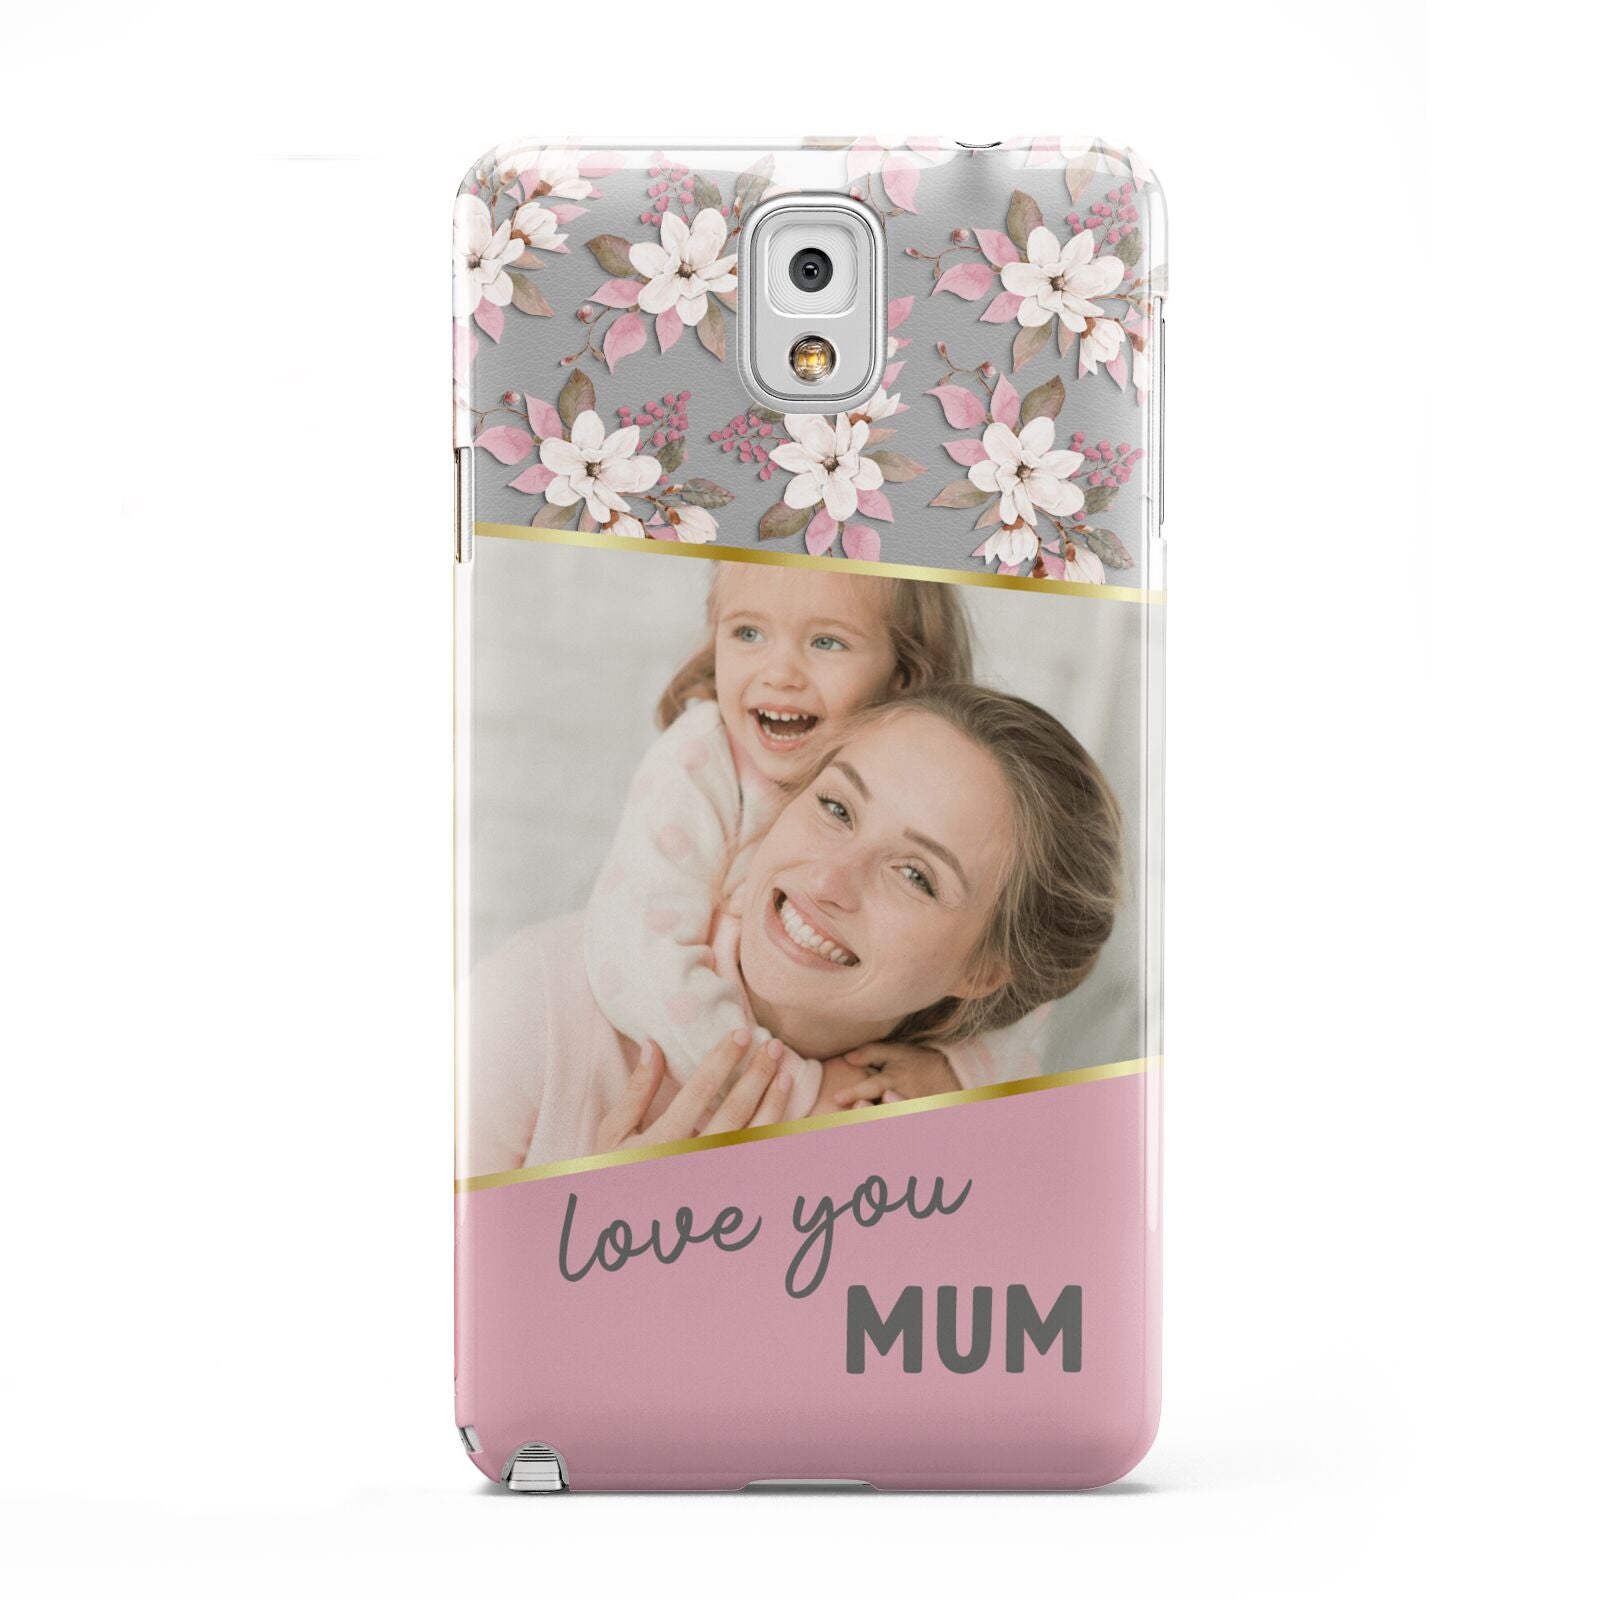 Personalised Love You Mum Samsung Galaxy Note 3 Case